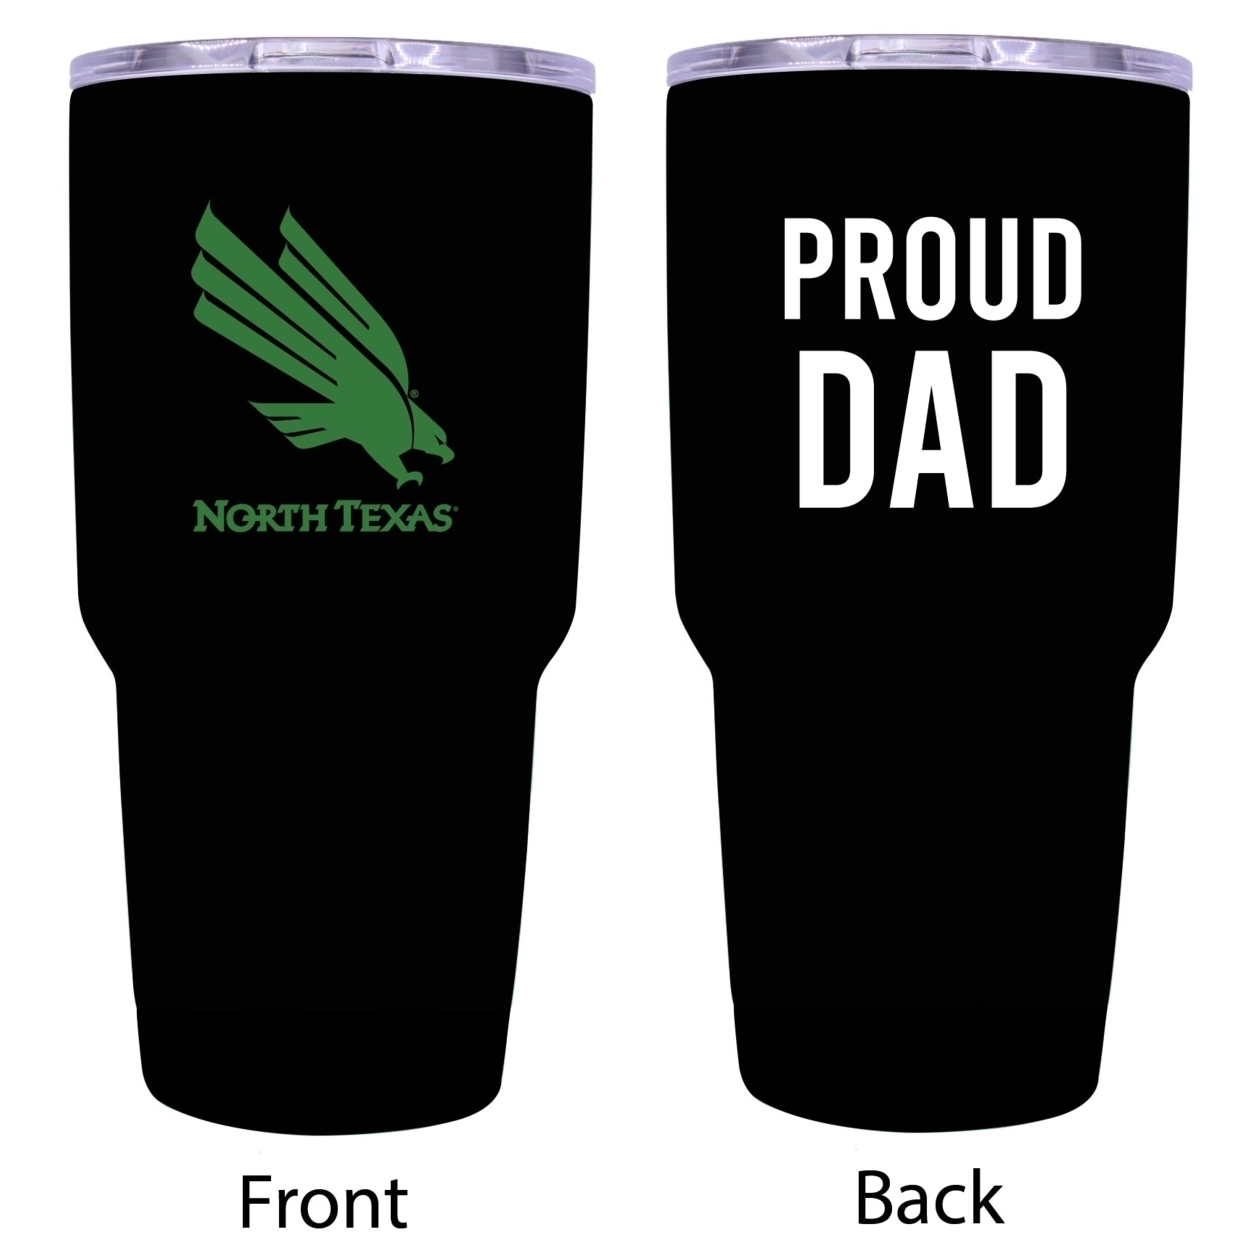 North Texas Proud Dad 24 Oz Insulated Stainless Steel Tumbler